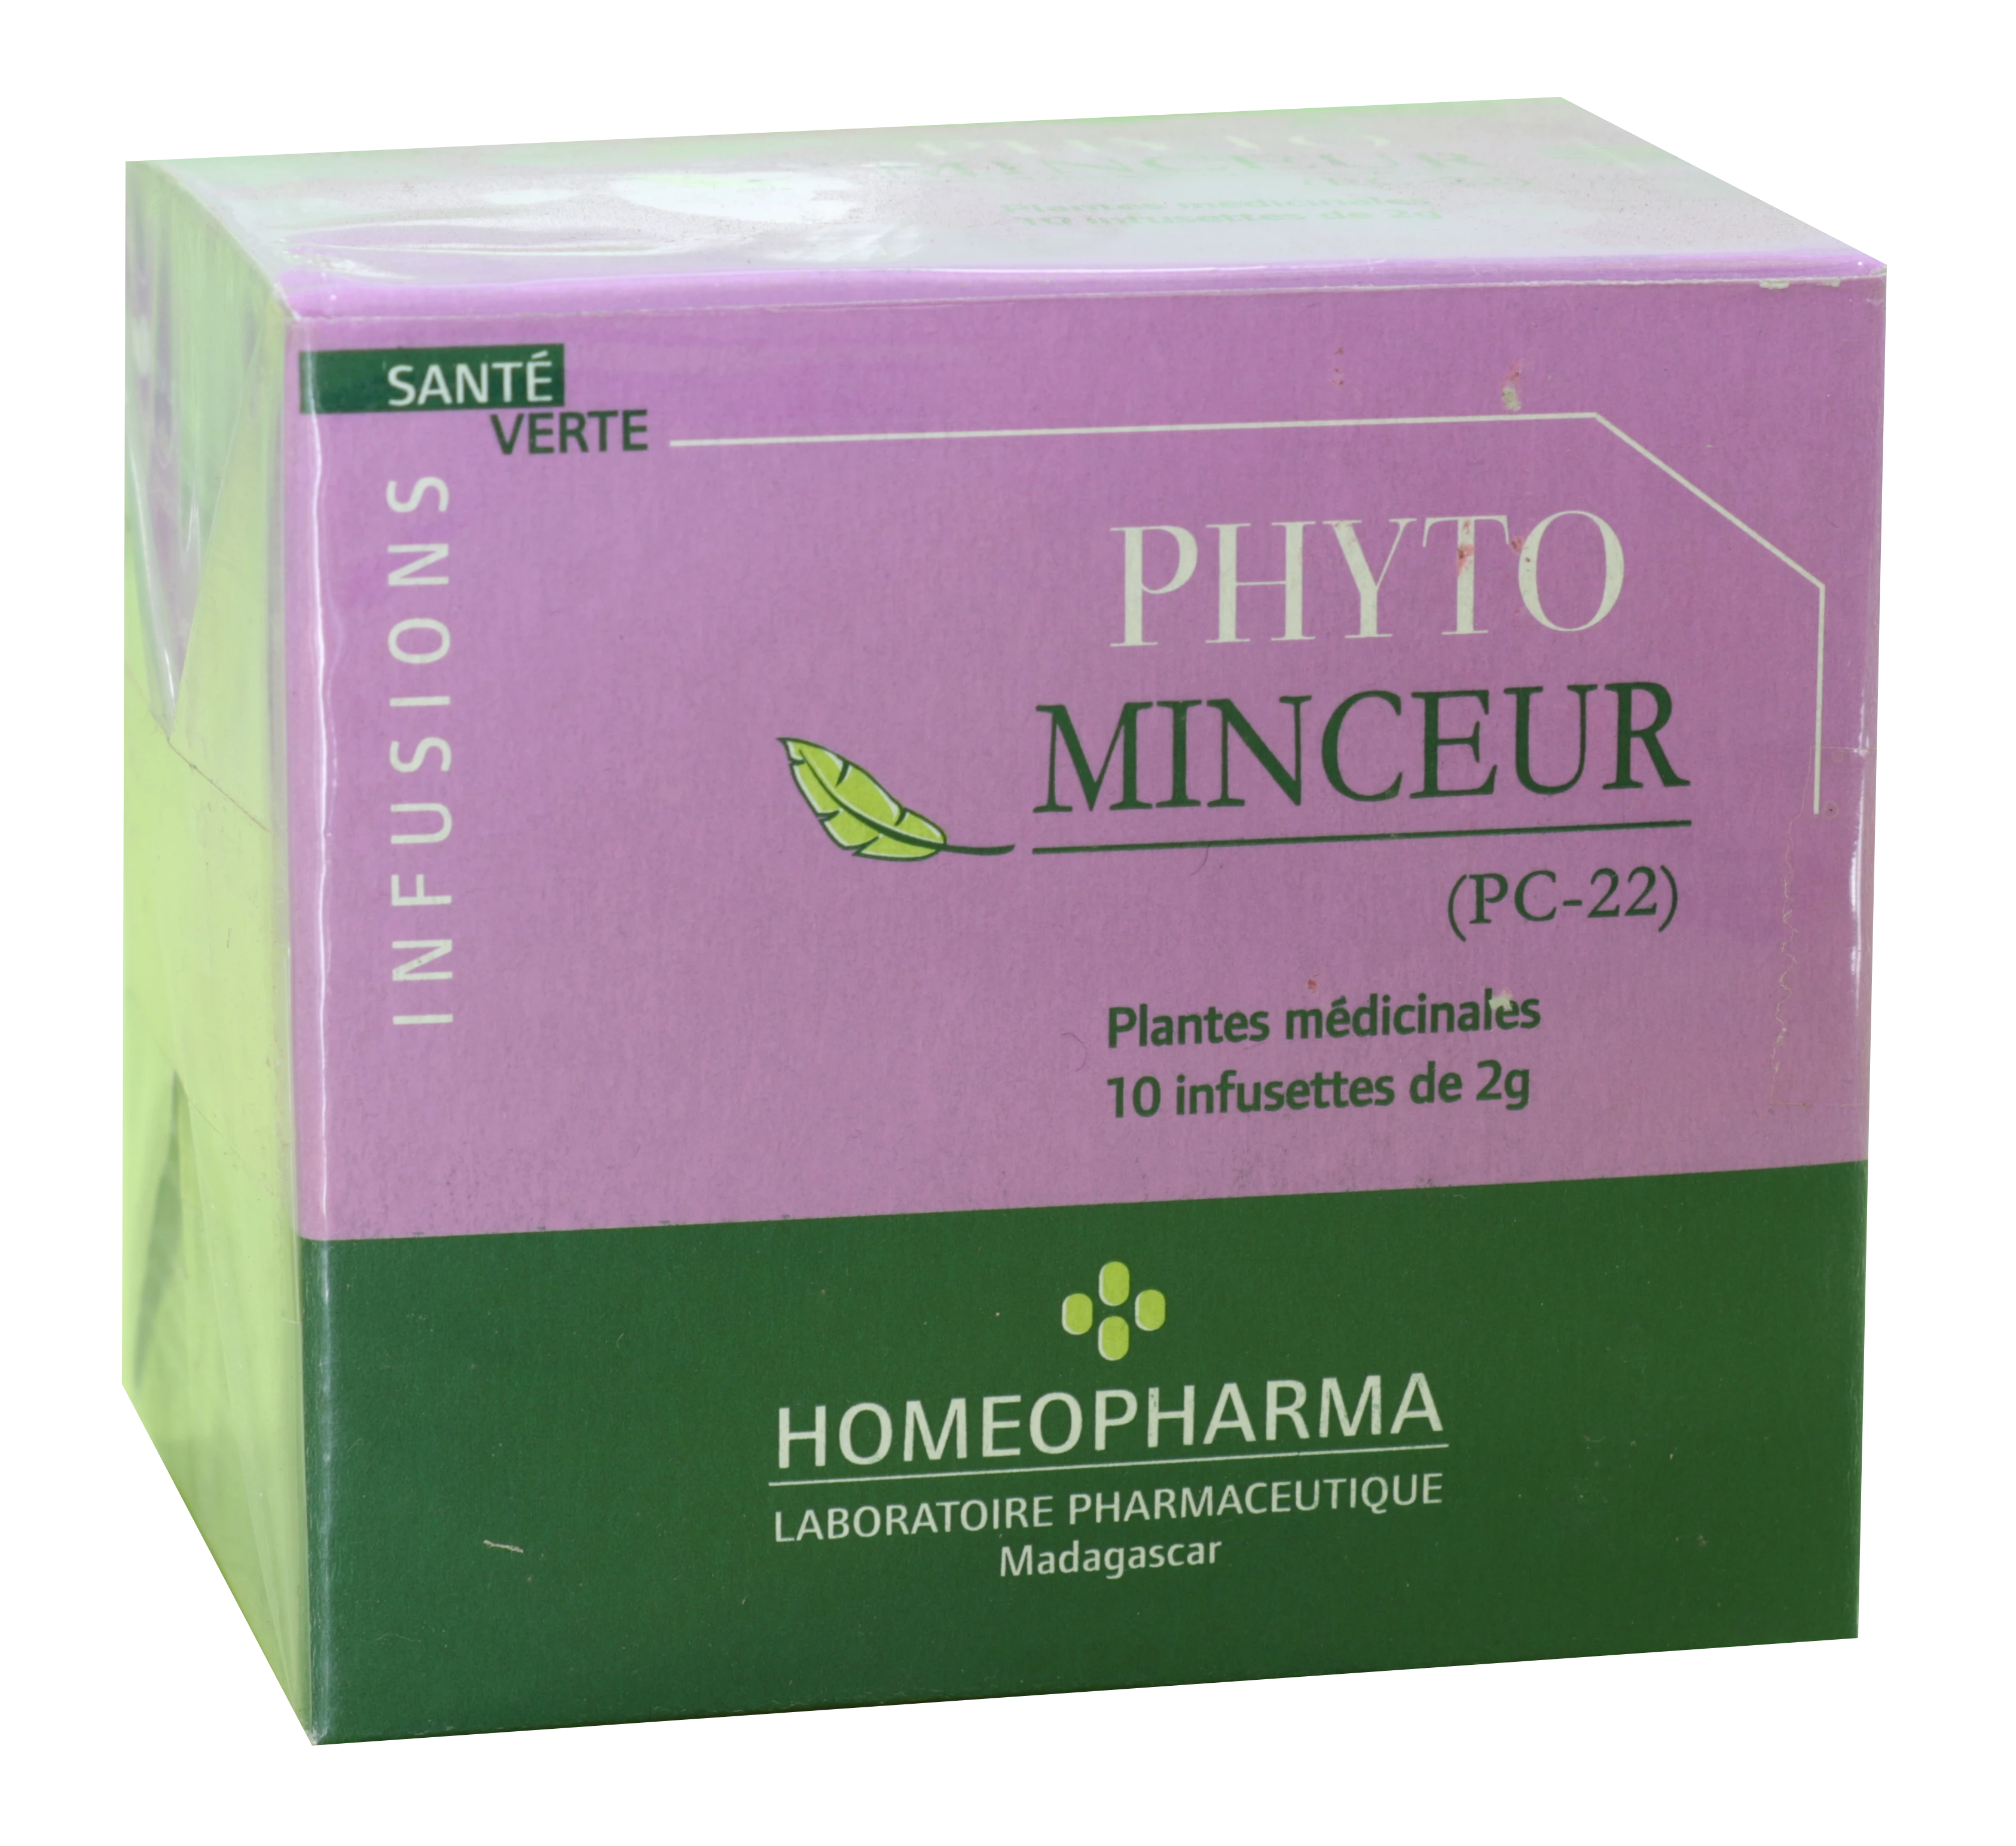 Phytotherapie Traditionnelle  Pc22-phyto-minceur Bte / 20 Infusettes - Homeopharma